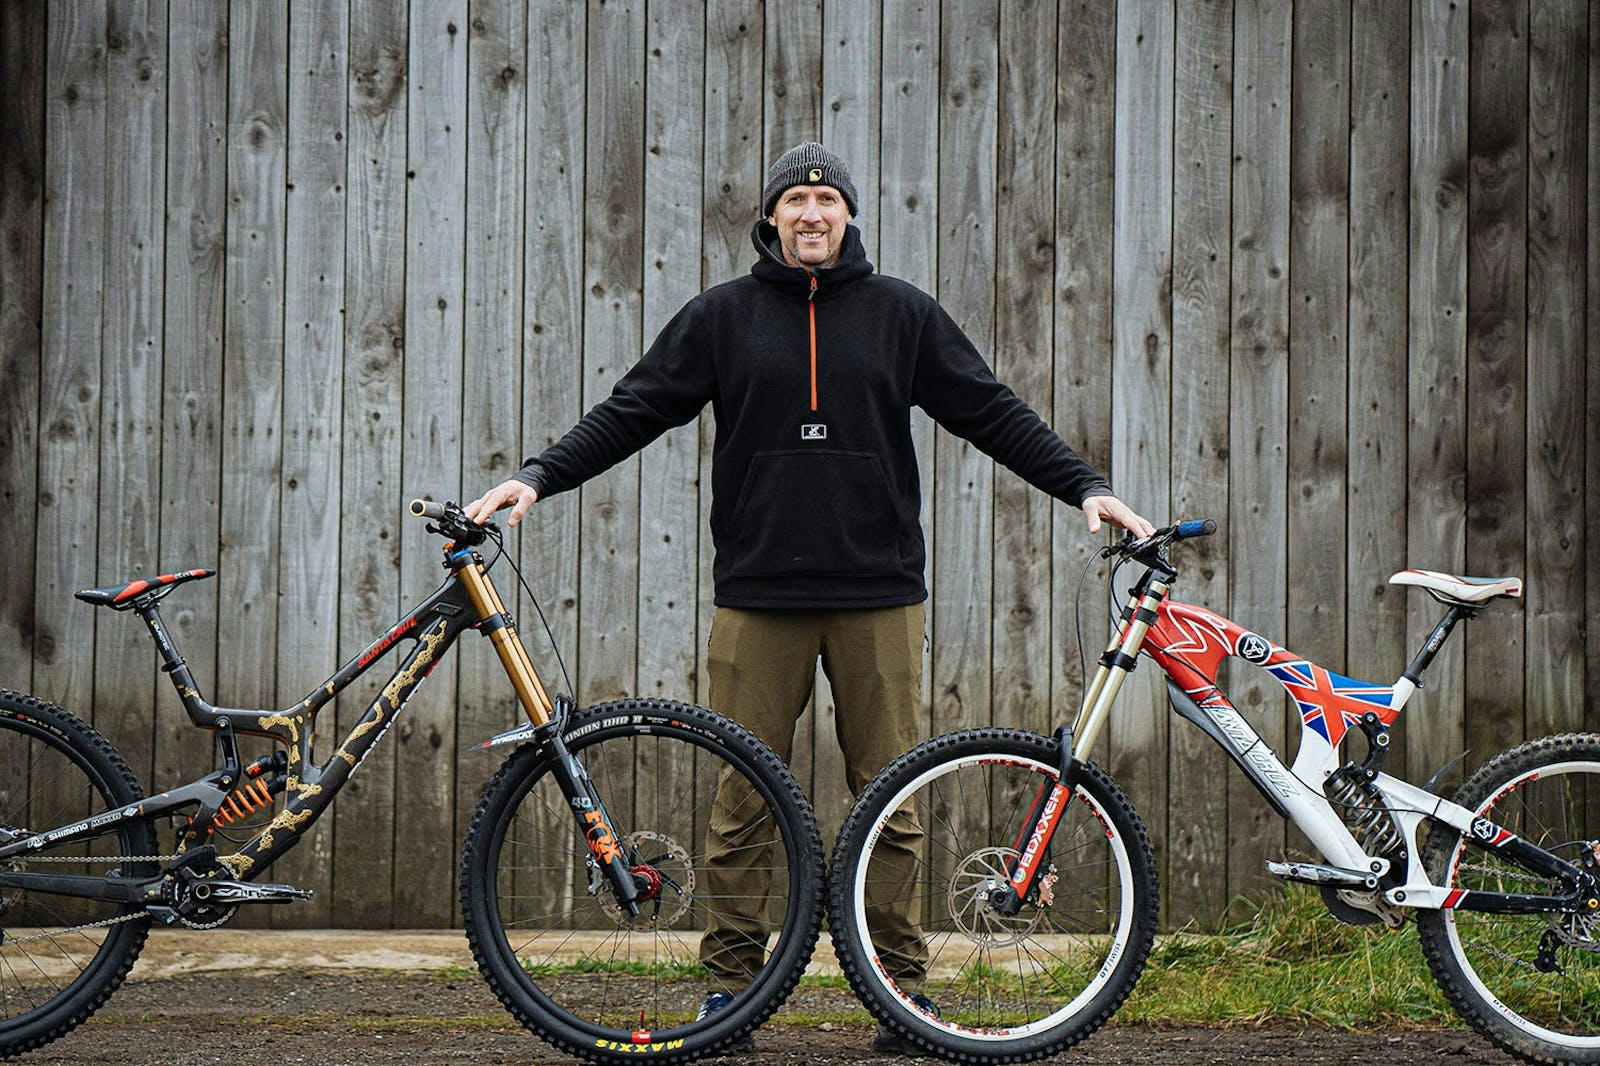 Steve Peat holding a 2021 V10 and a 2006 V10 - Old vs. New